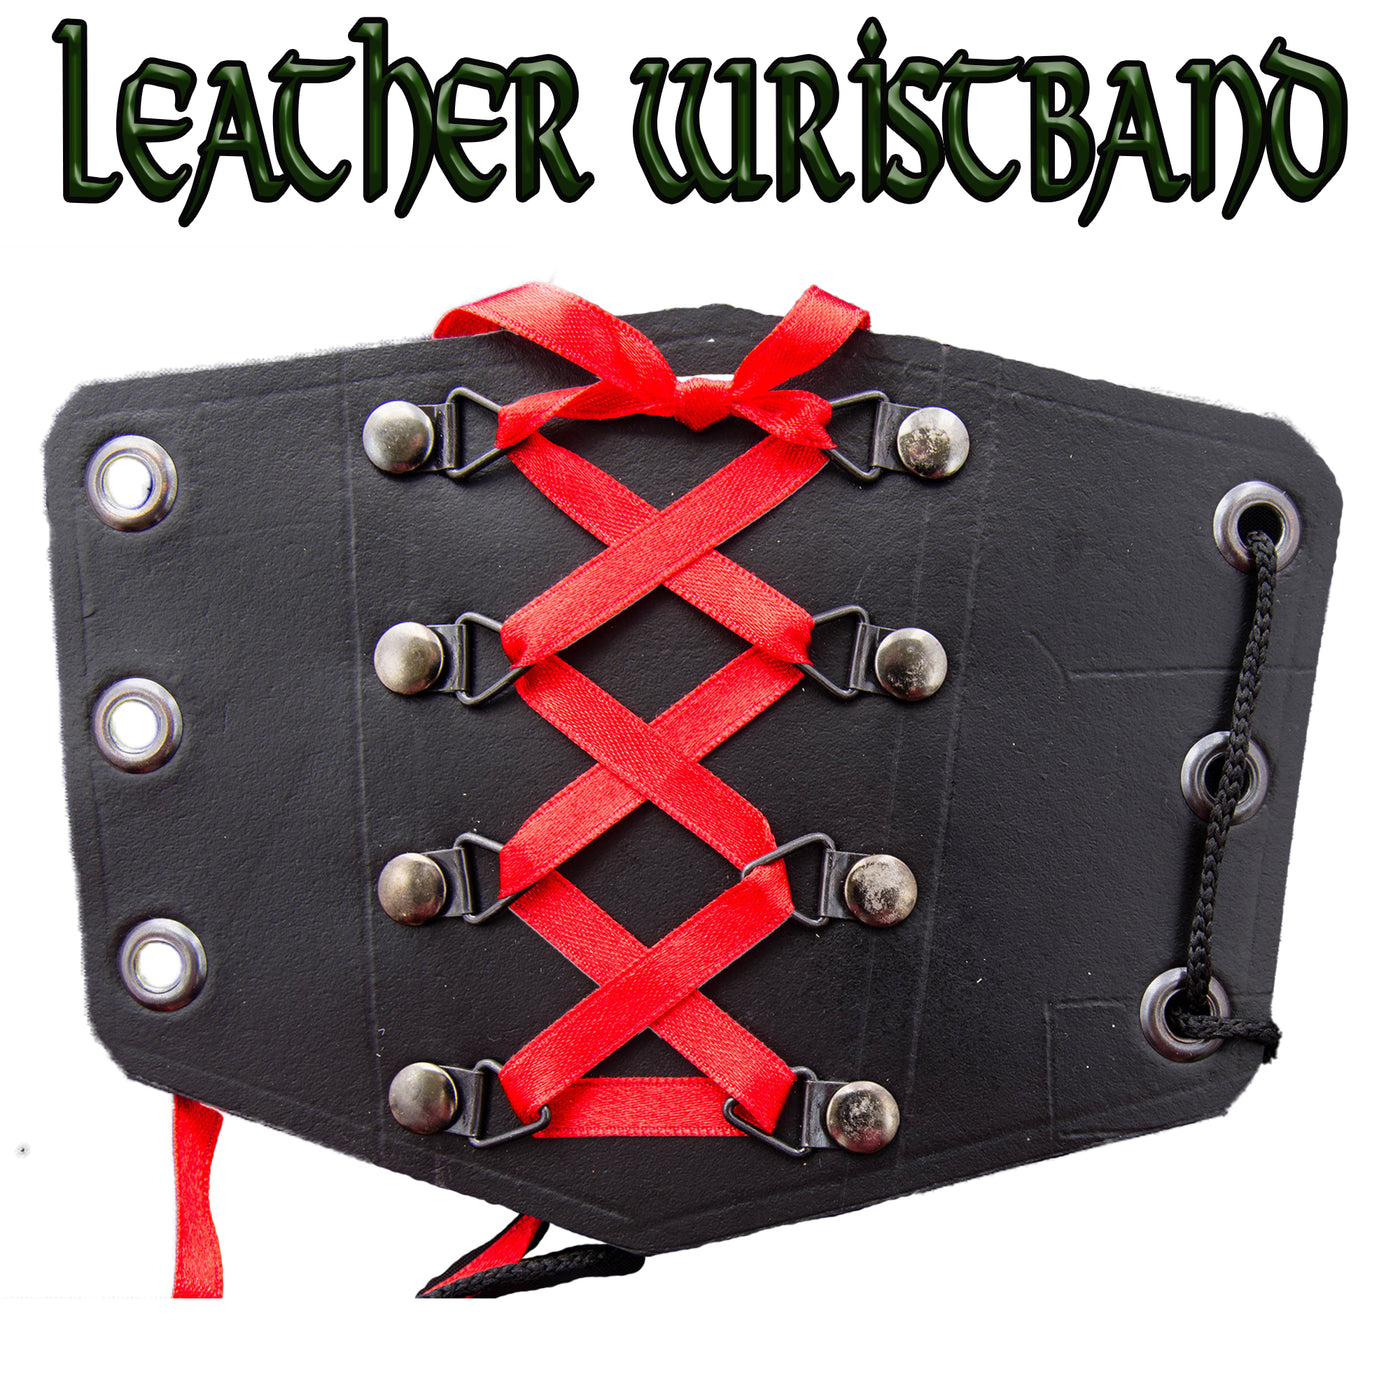 Real leather wristband, wristcuff with red ribbon plaited decoration running down the centre, attached with bootlace cord, great costume accessory